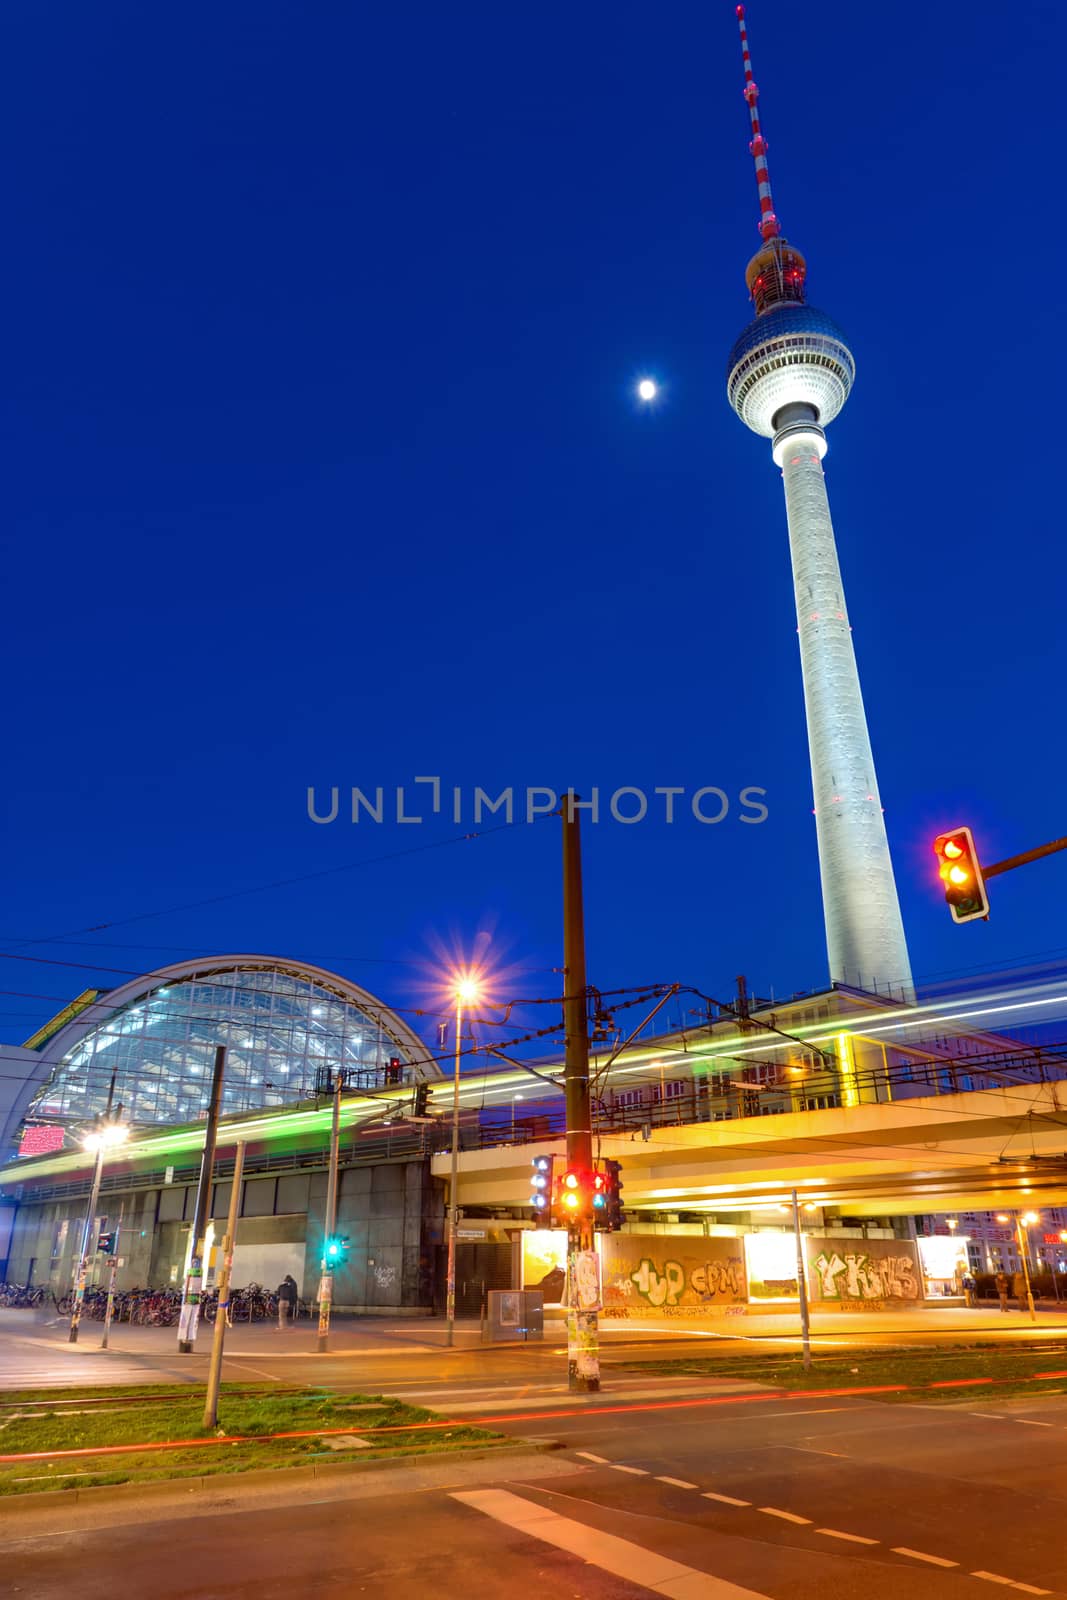 The Alexanderplatz in Berlin at night with the television tower and the train station